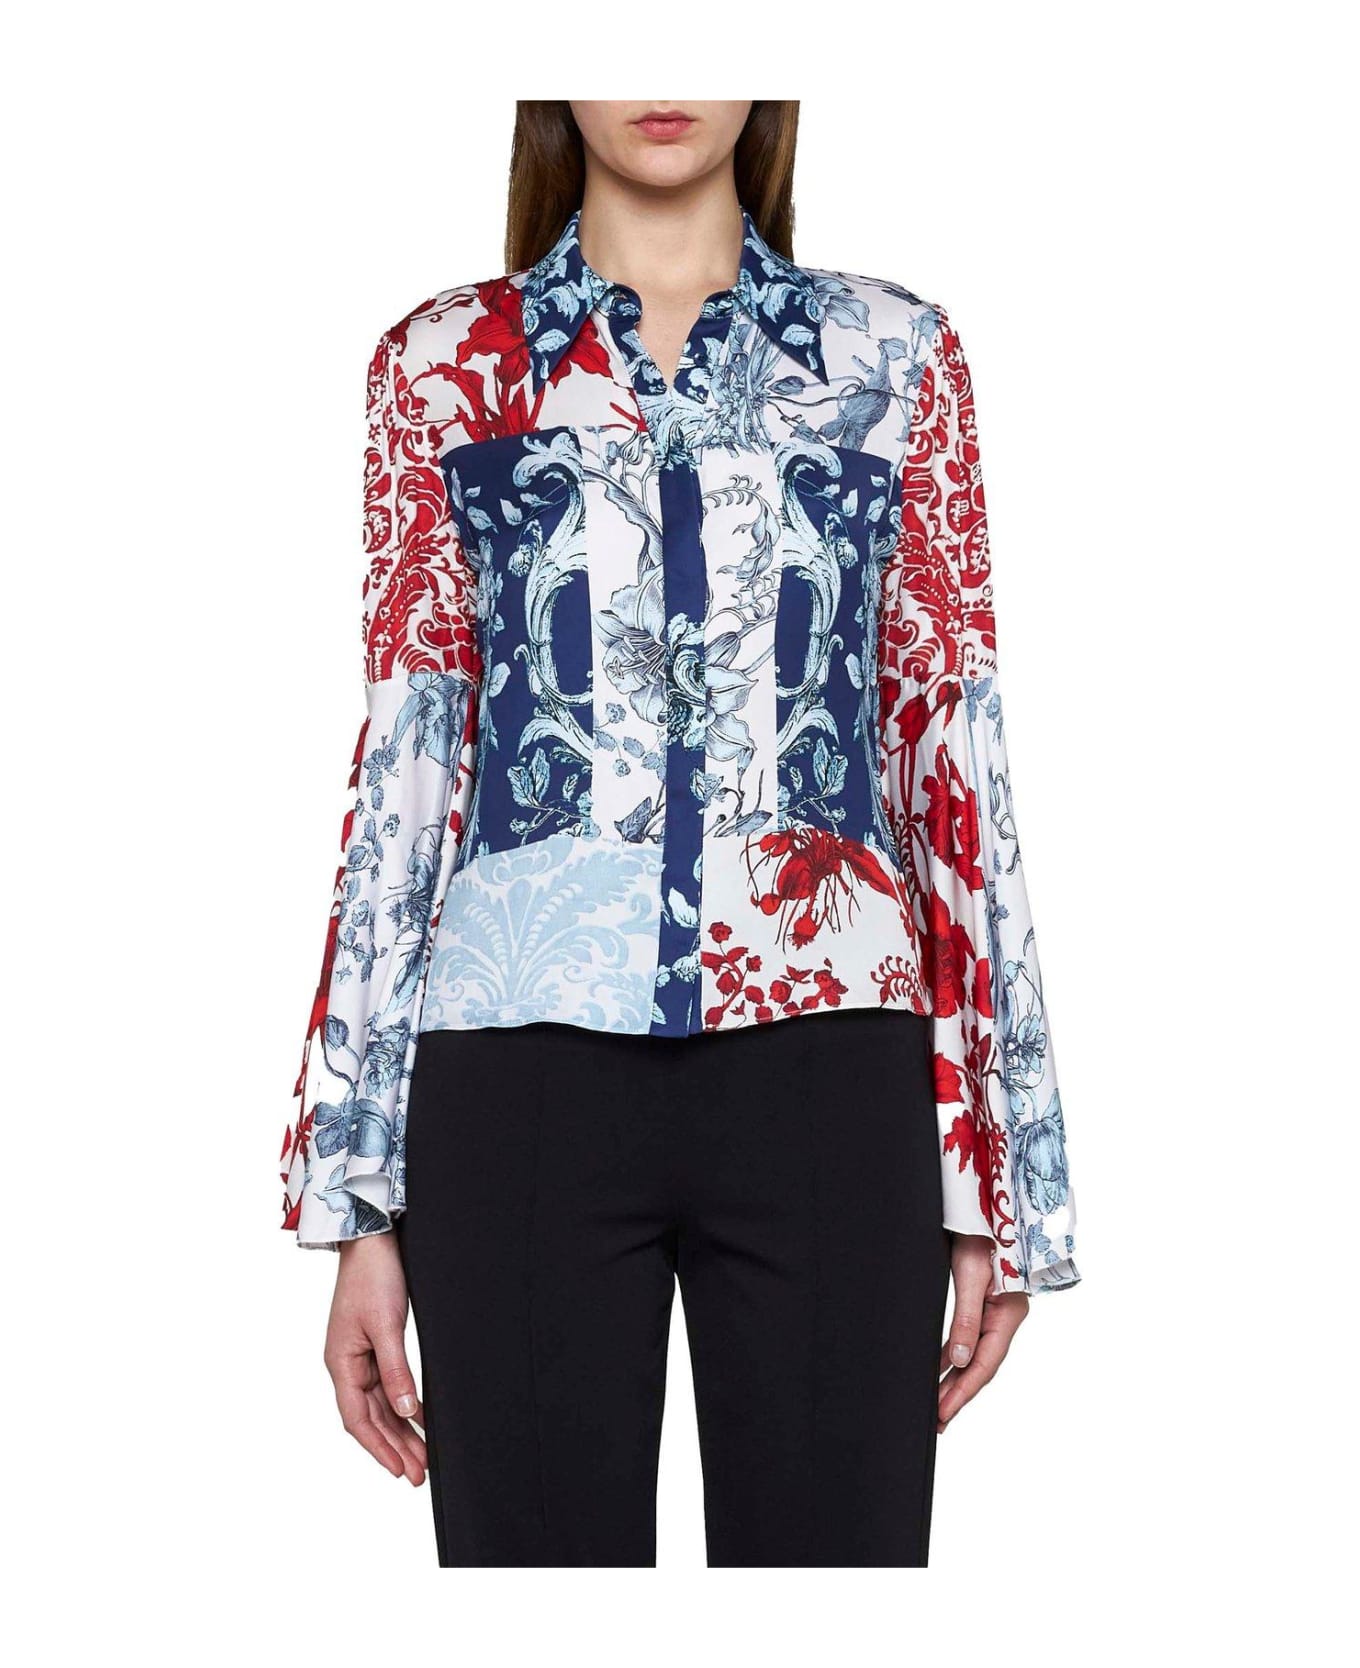 Alice + Olivia Willa Floral-printed Bell-sleeved Blouse - Blue ブラウス